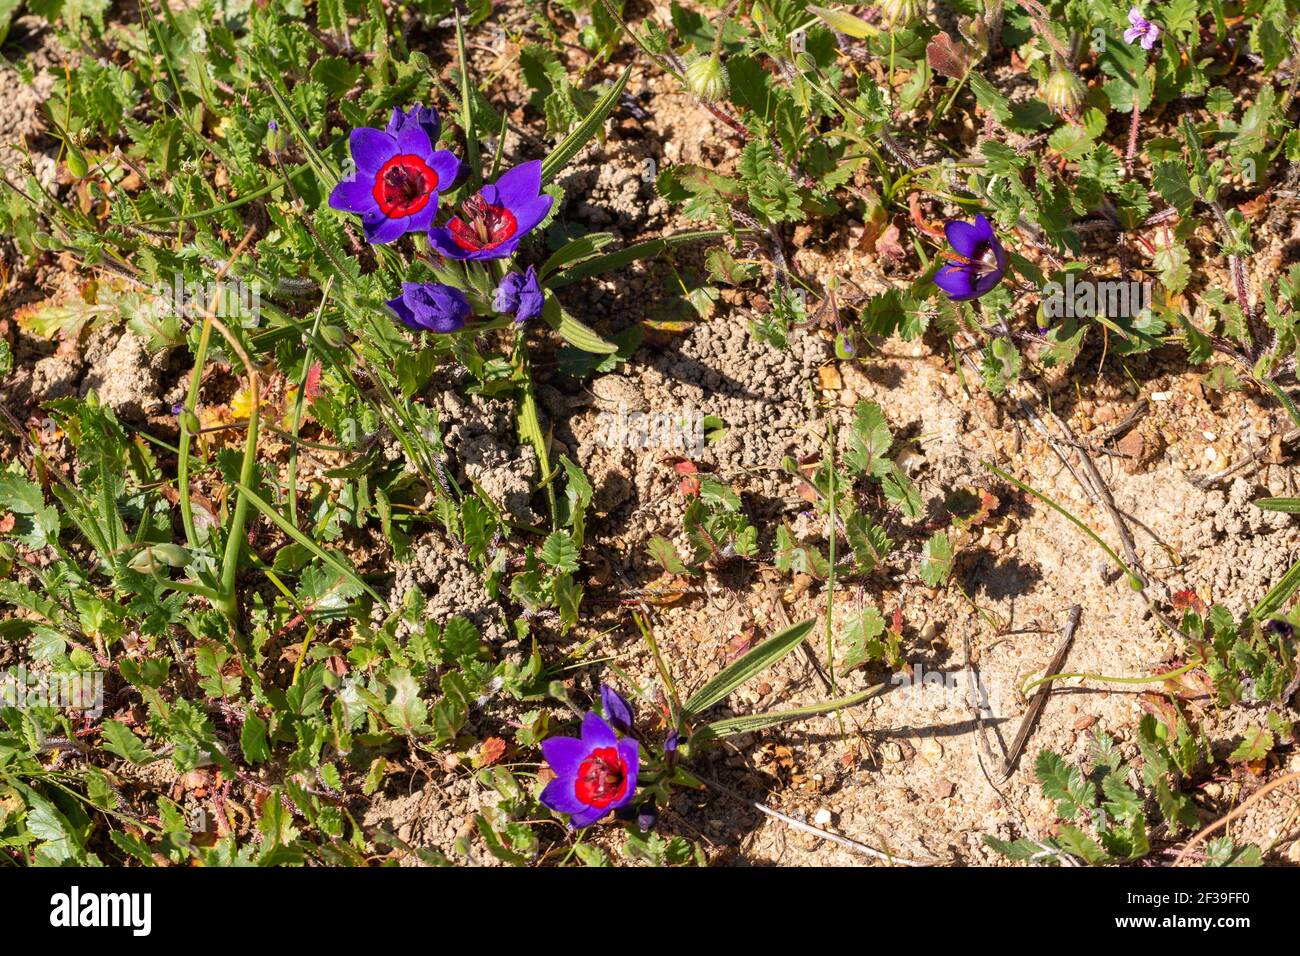 Some violet flowers of Babiana rubrocyanea seen in natural habitat close to Darling in the Western Cape of South Africa Stock Photo